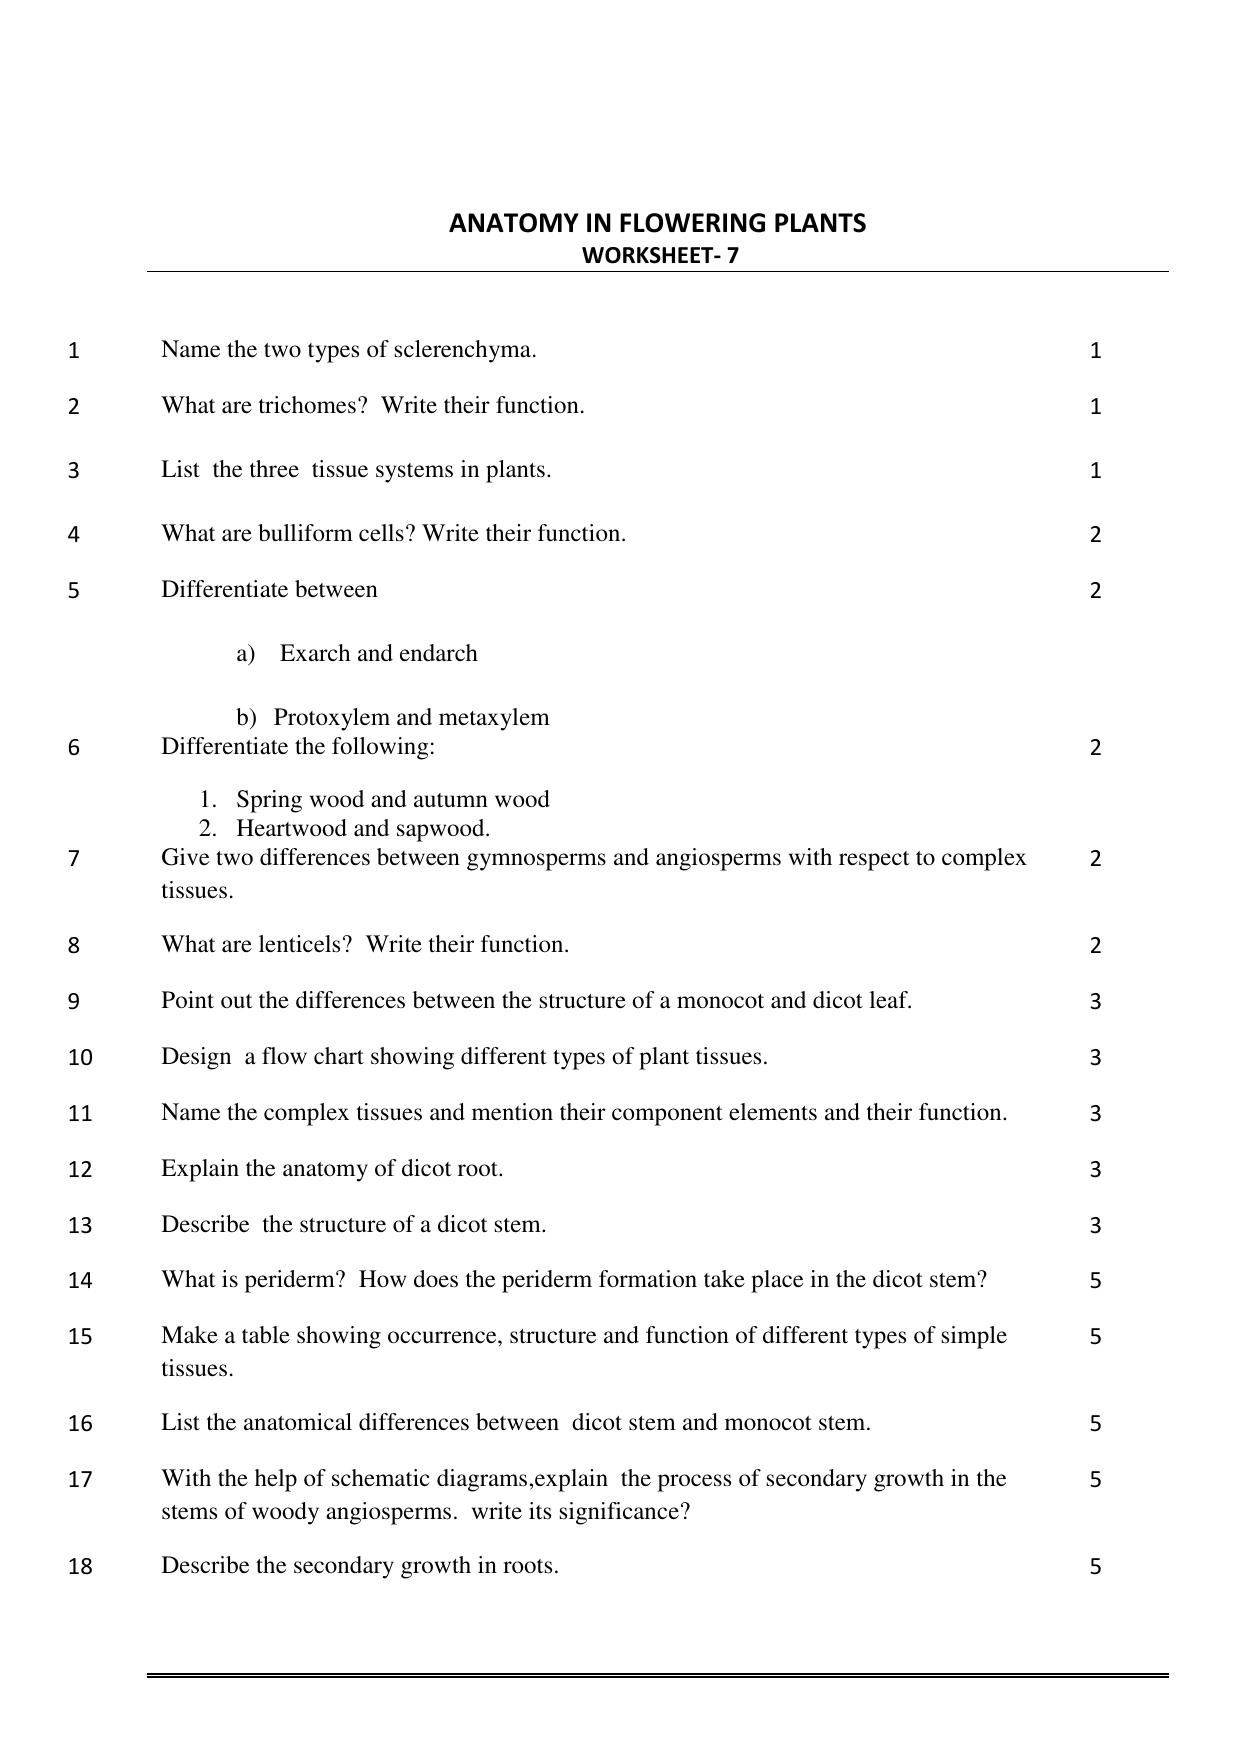 CBSE Worksheets for Class 11 Biology Anatomy in Flowering Plants Assignment - Page 1